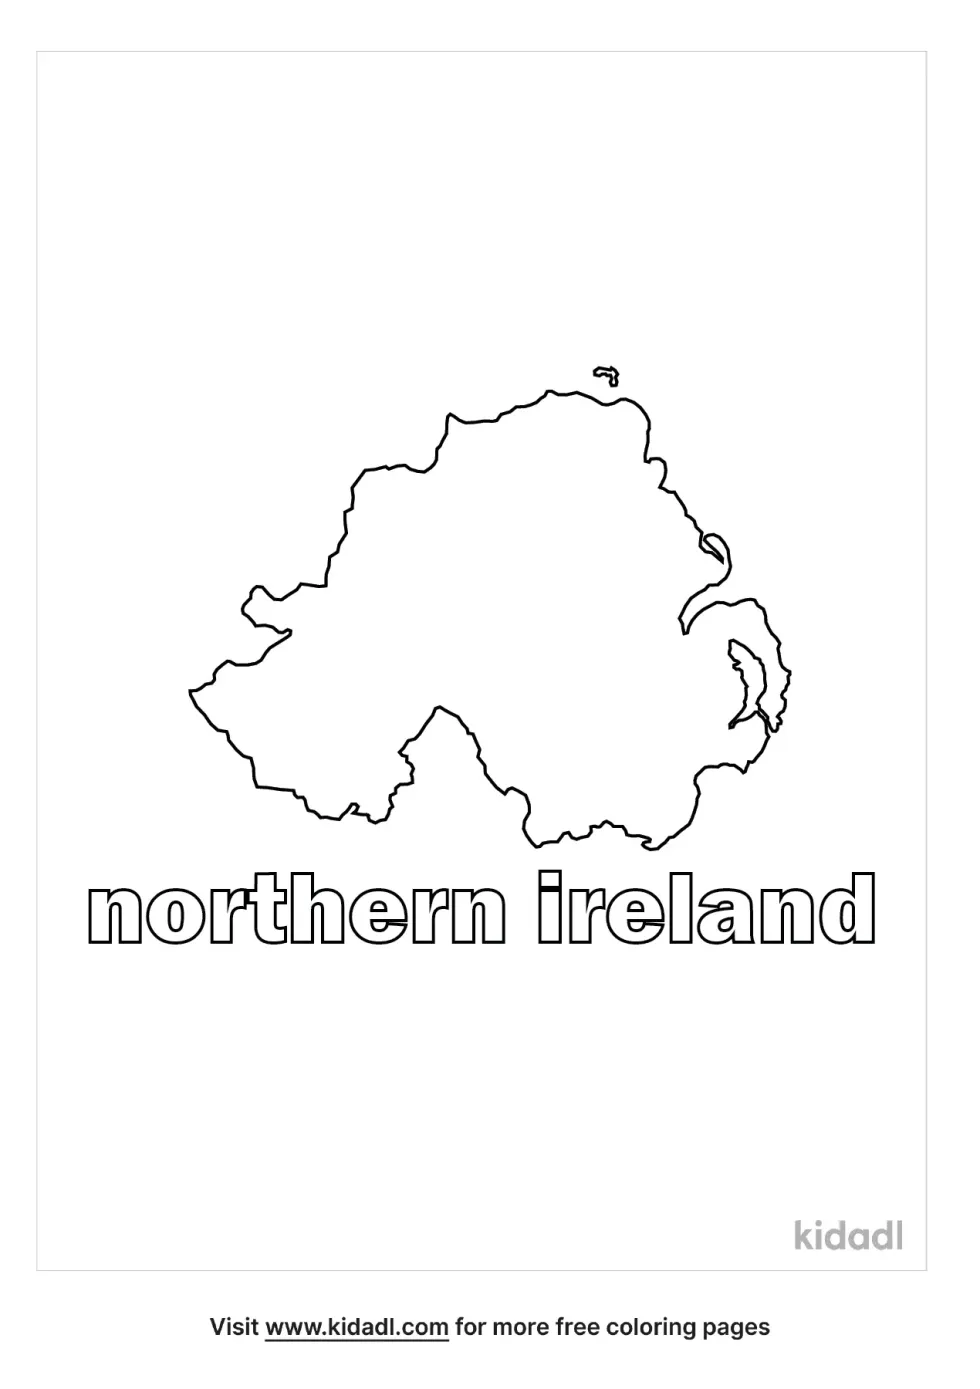 Northern Ireland Coloring Page